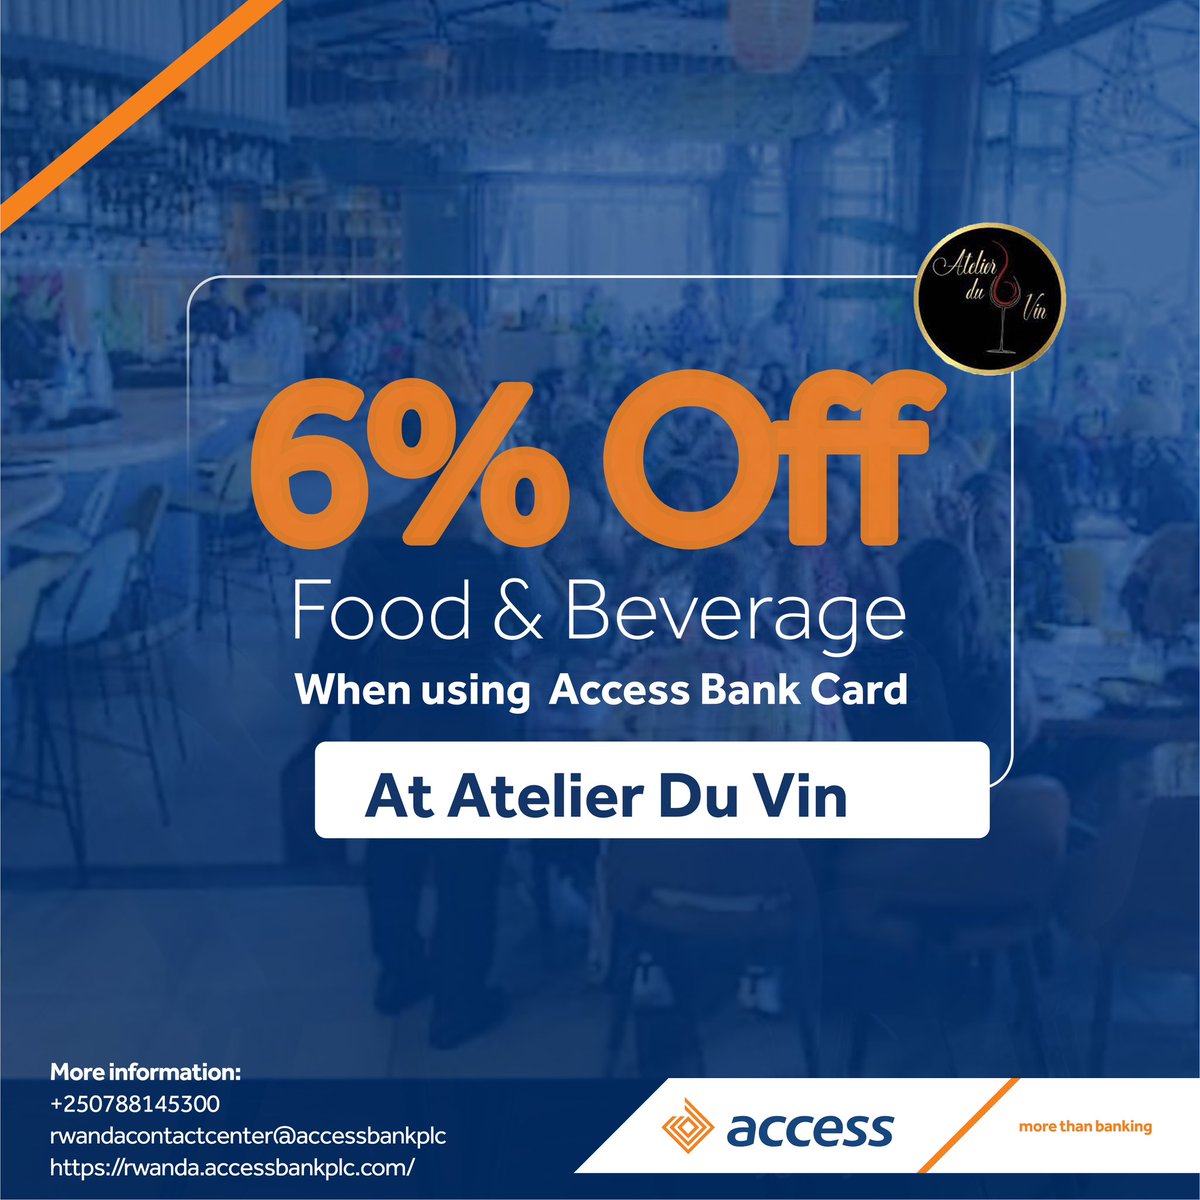 Get a special discount at Atelier Du Vin and enjoy a special treat from us! Use your Access Bank Credit or Debit Card and receive an exclusive 6% discount on your purchases. #AccessMore #MoreForYou